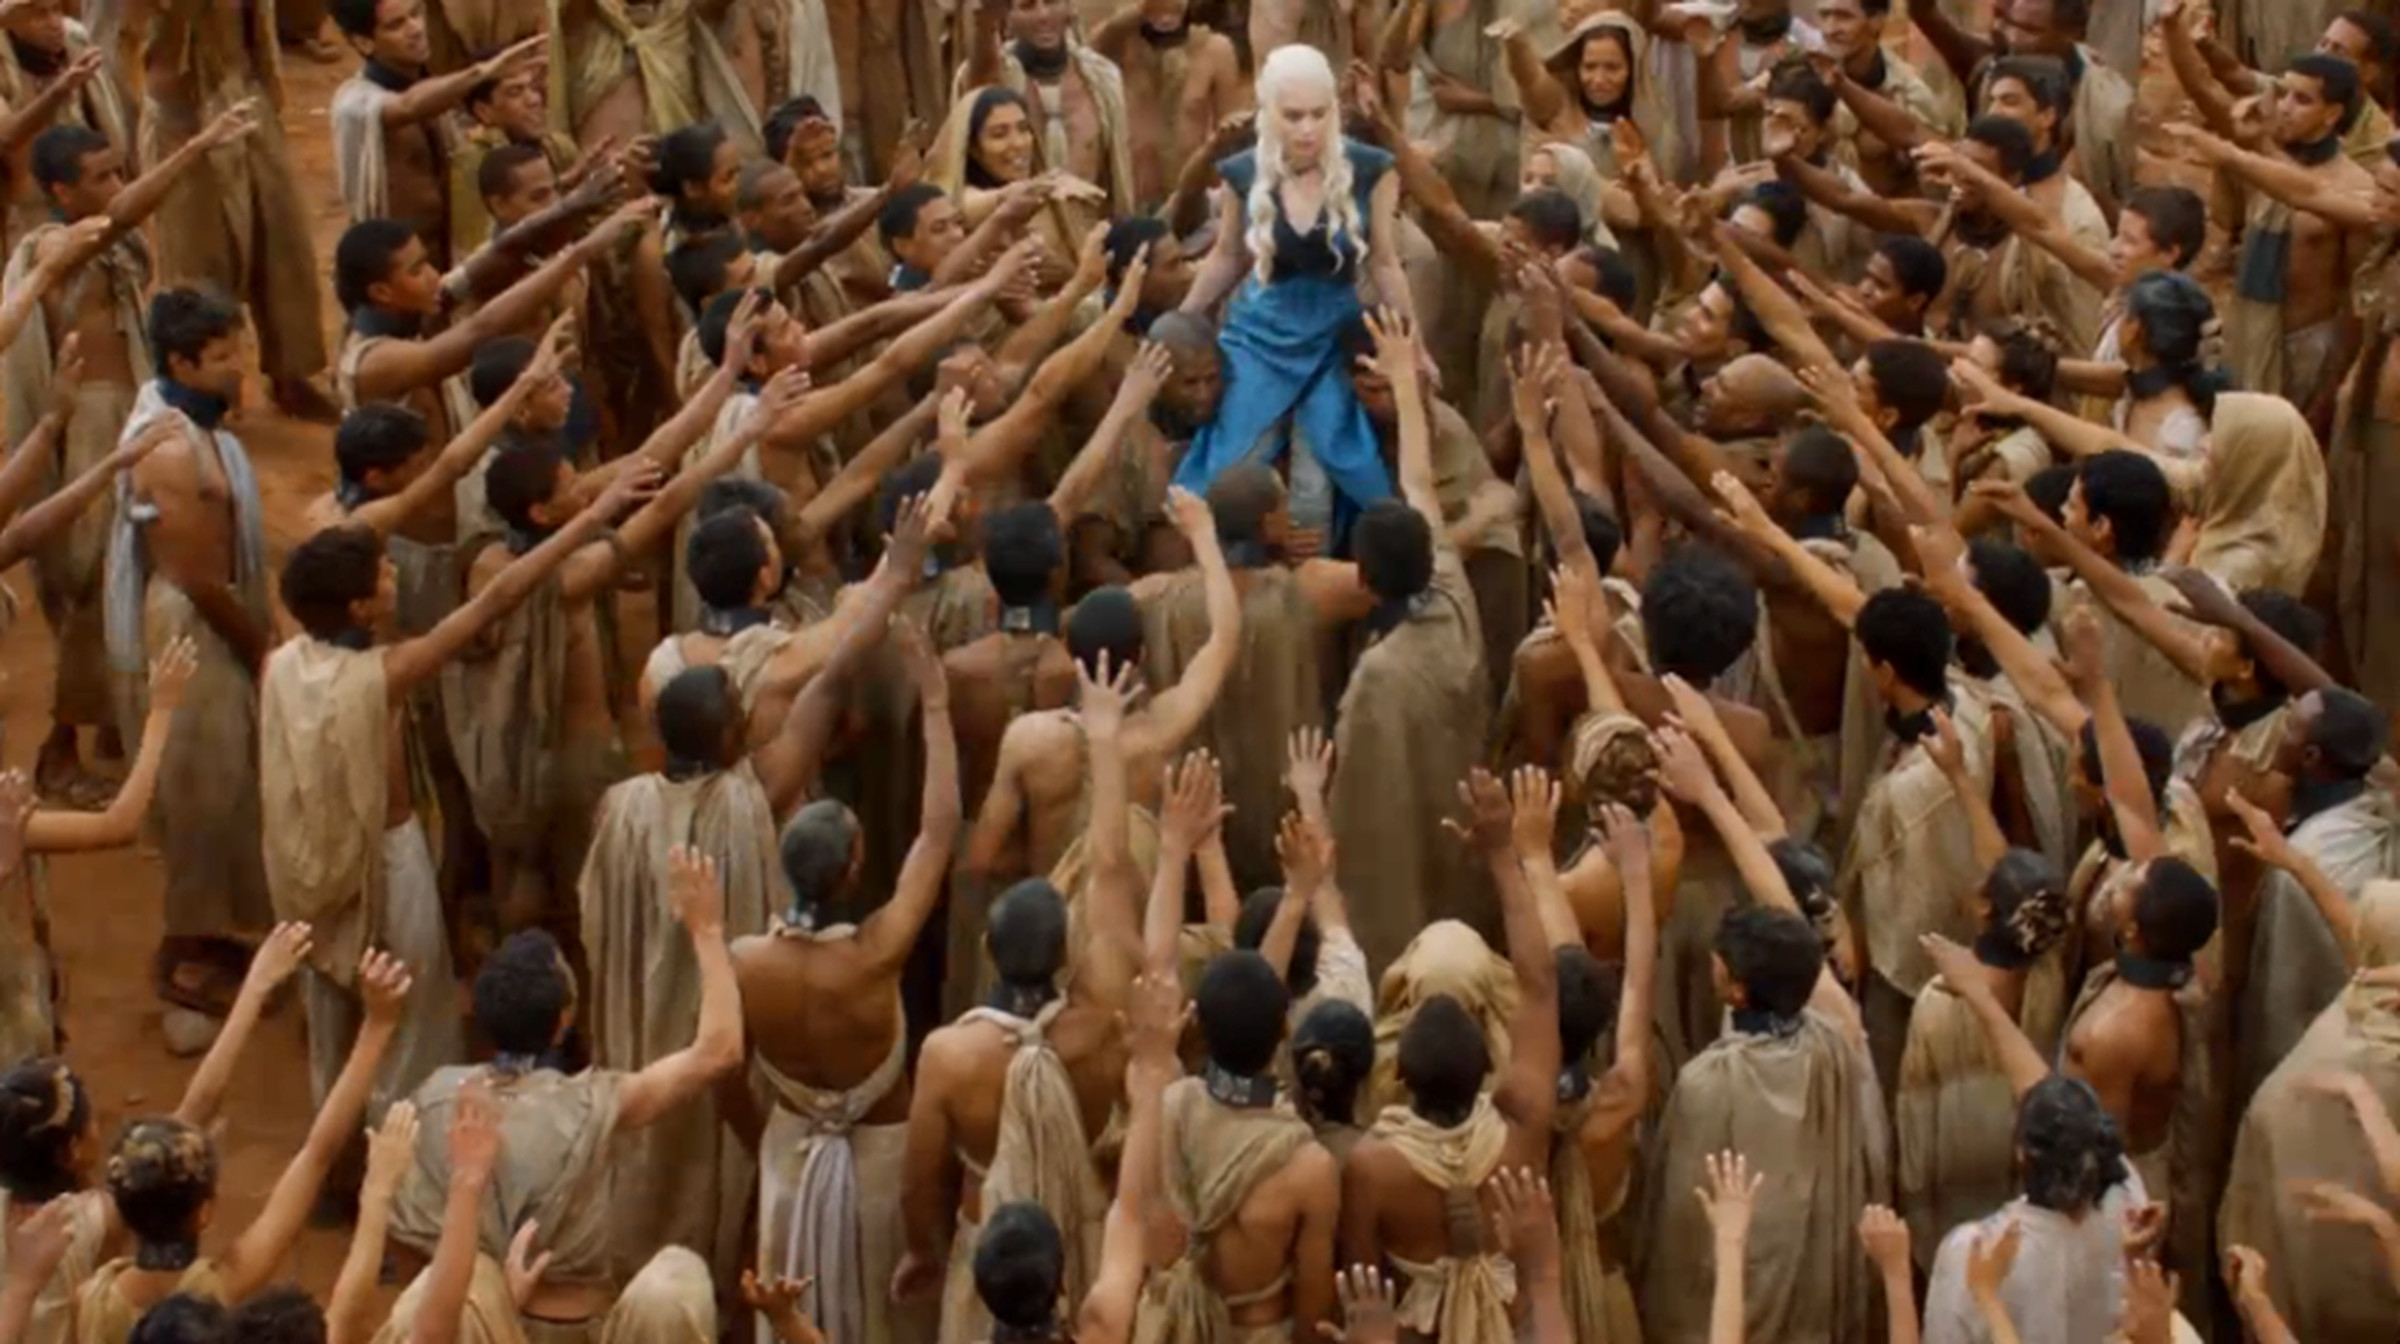 A problematic scene from Game of Thrones where Daenerys is presented as the savior of some of the only people of color on the show.